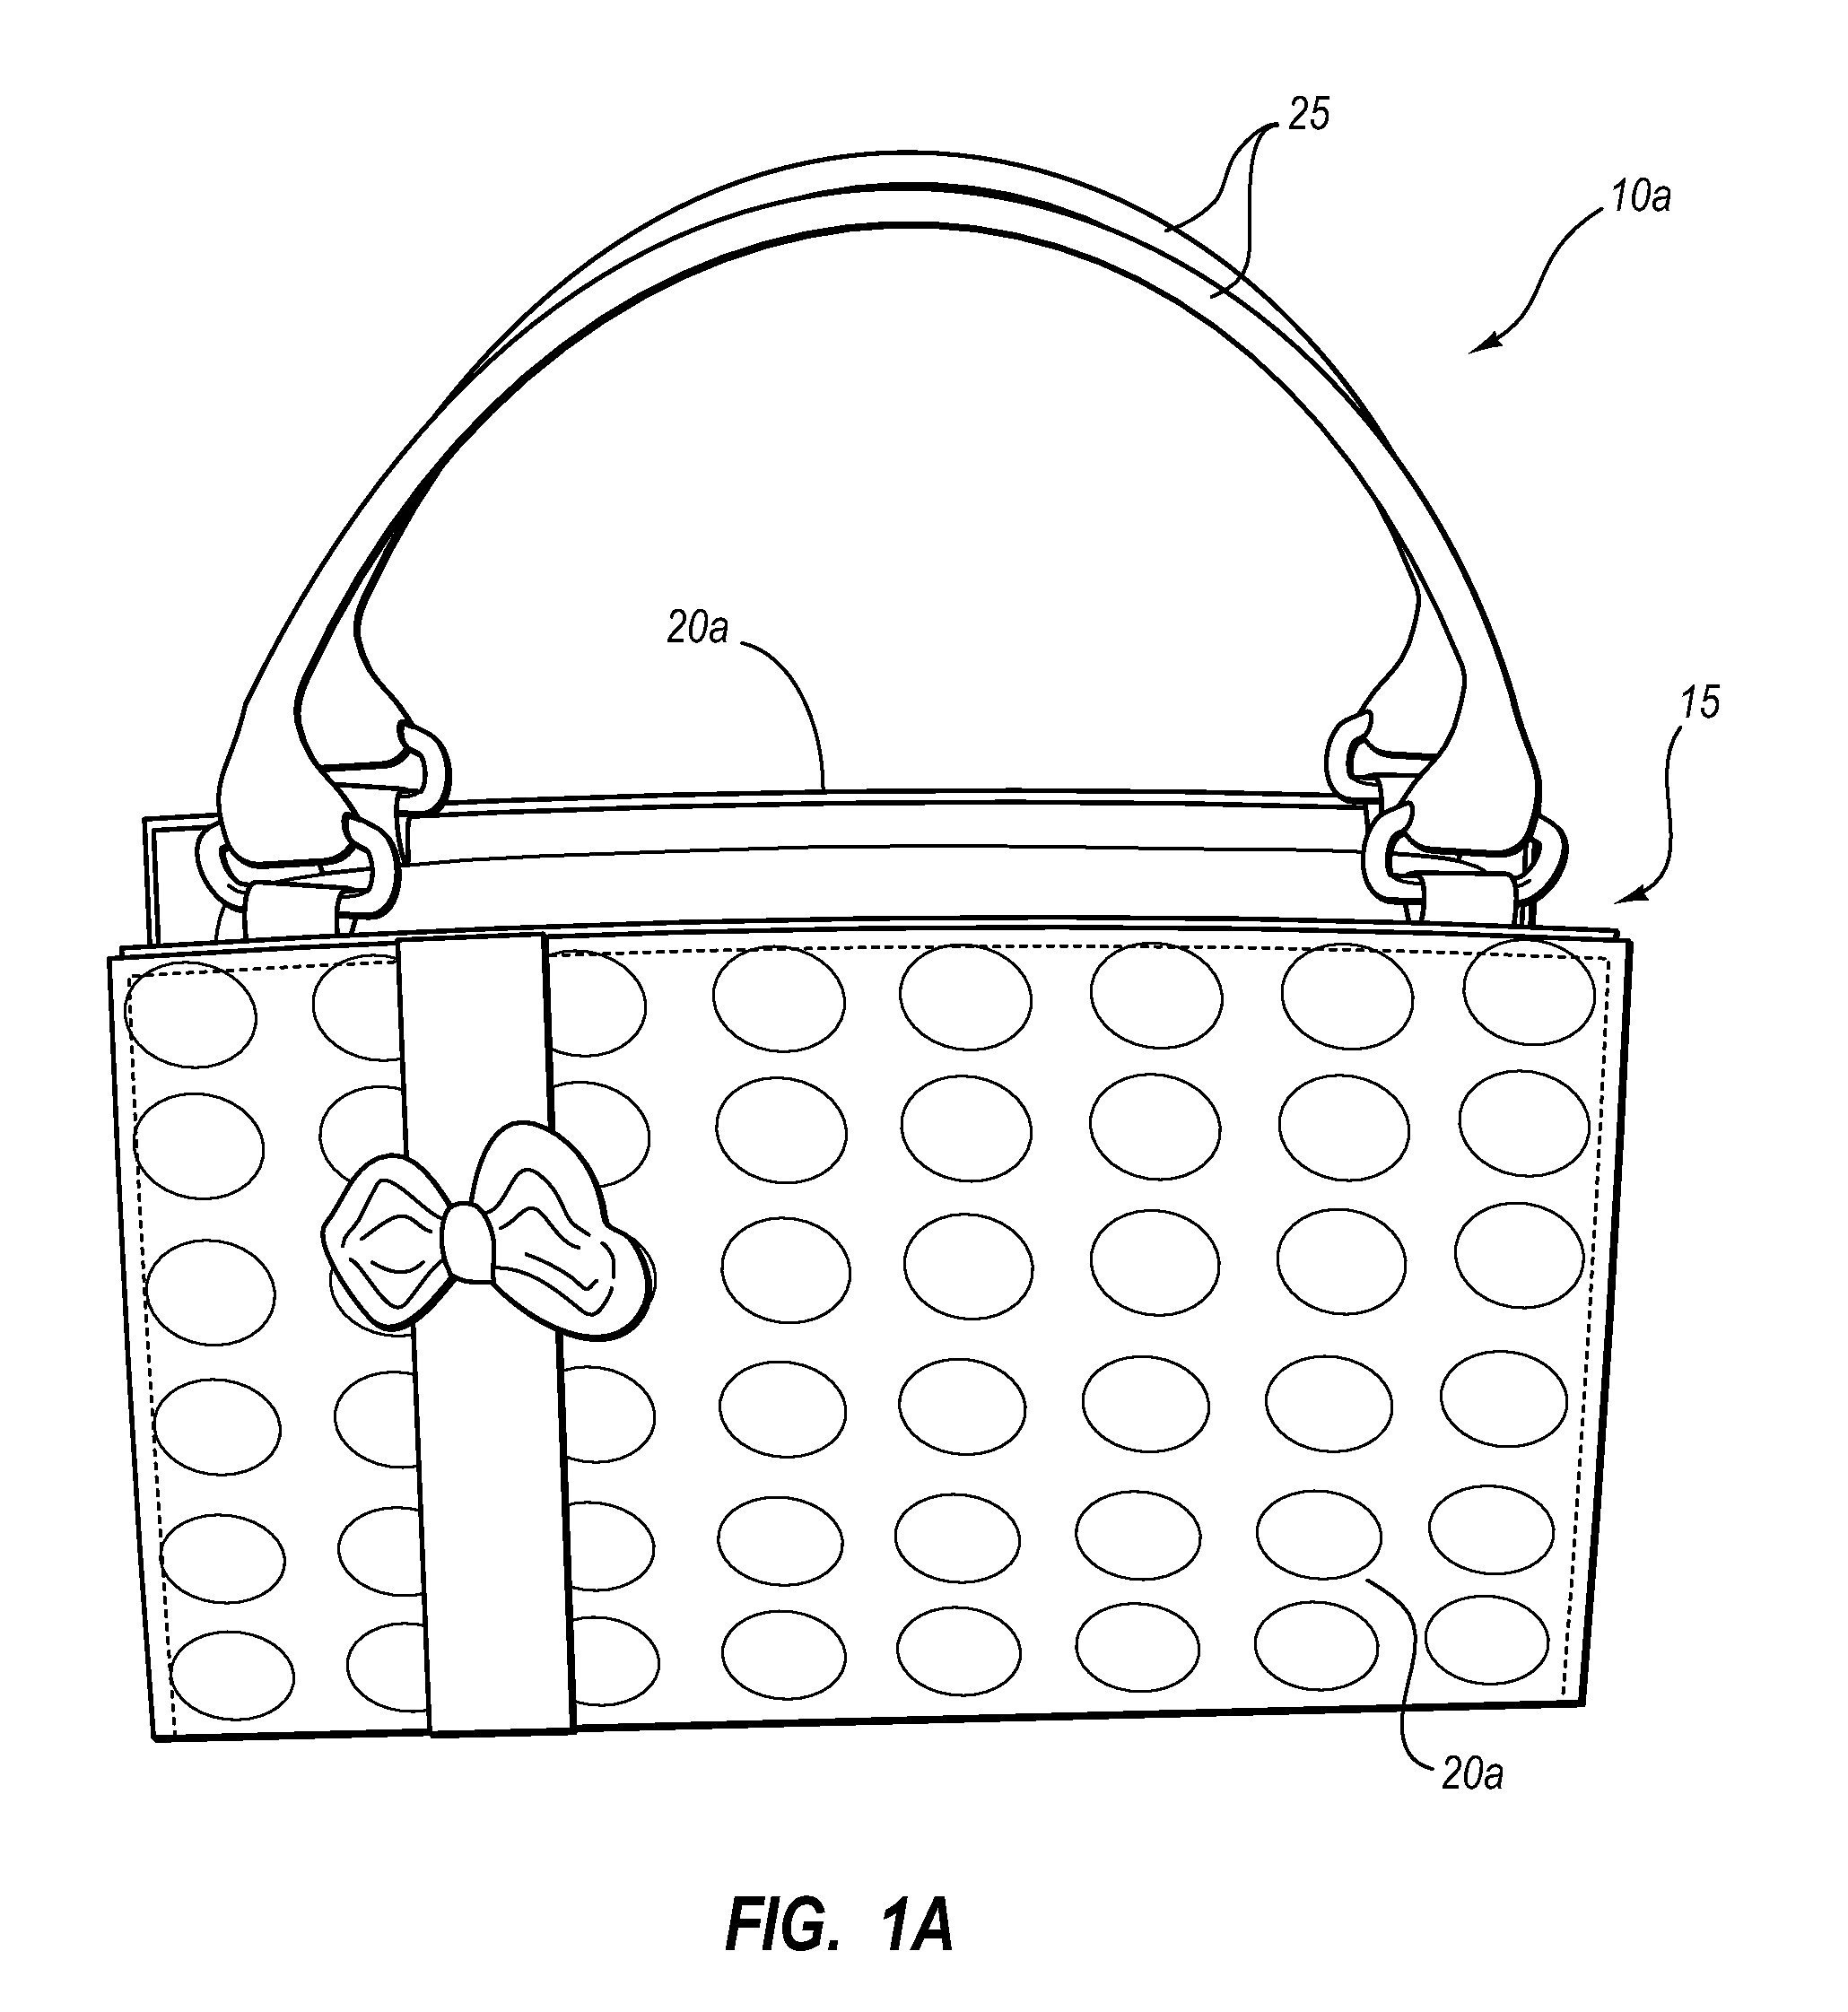 Systems and methods for customizing handbags